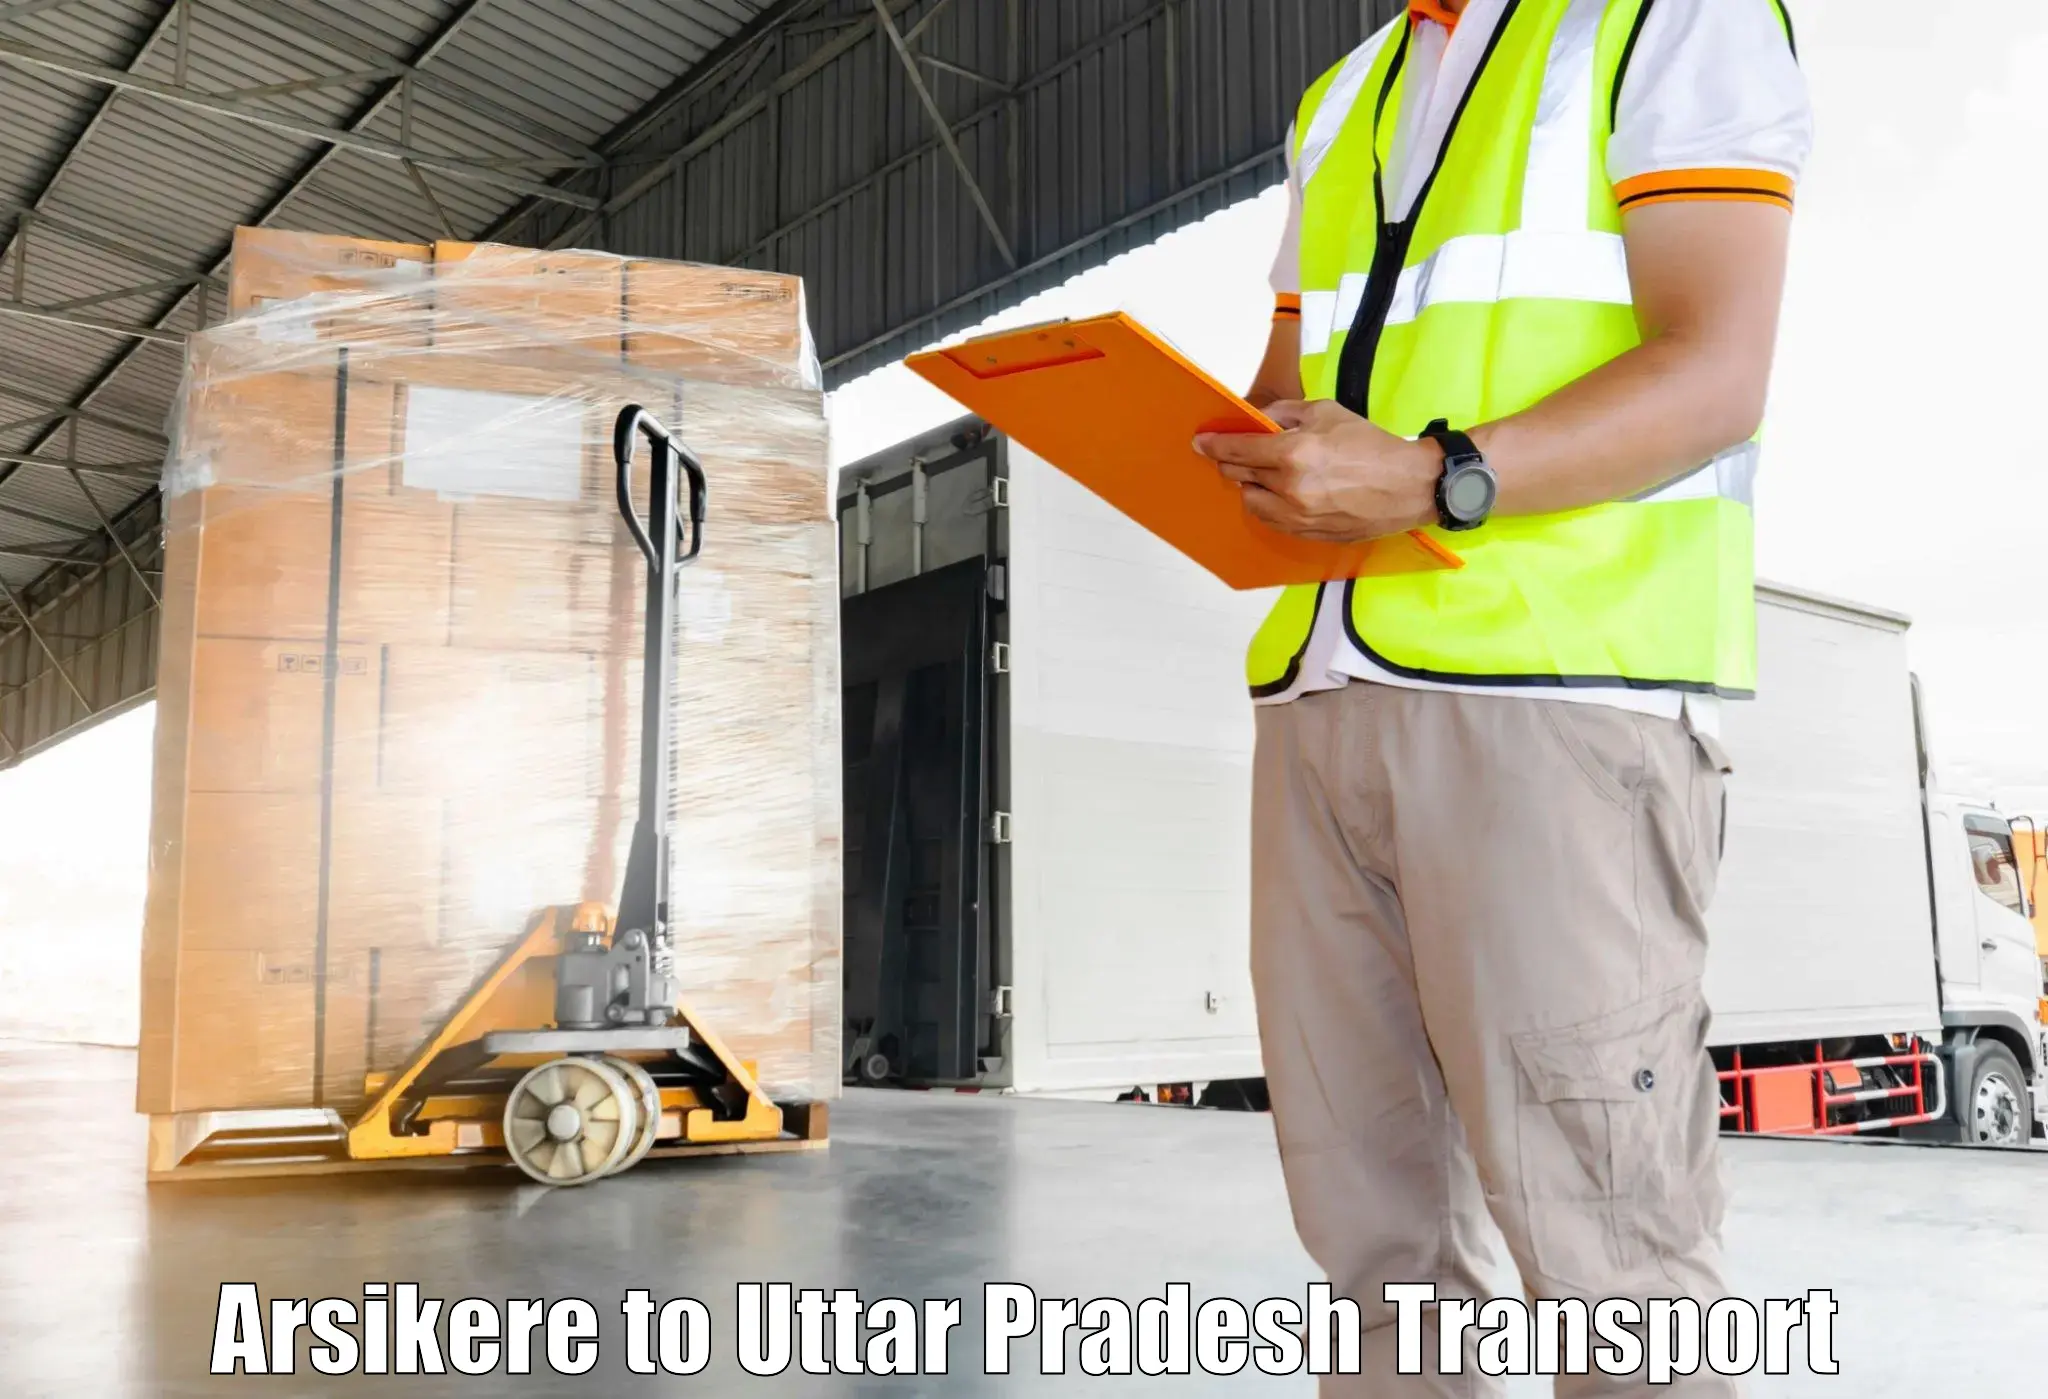 Commercial transport service Arsikere to Fatehabad Agra